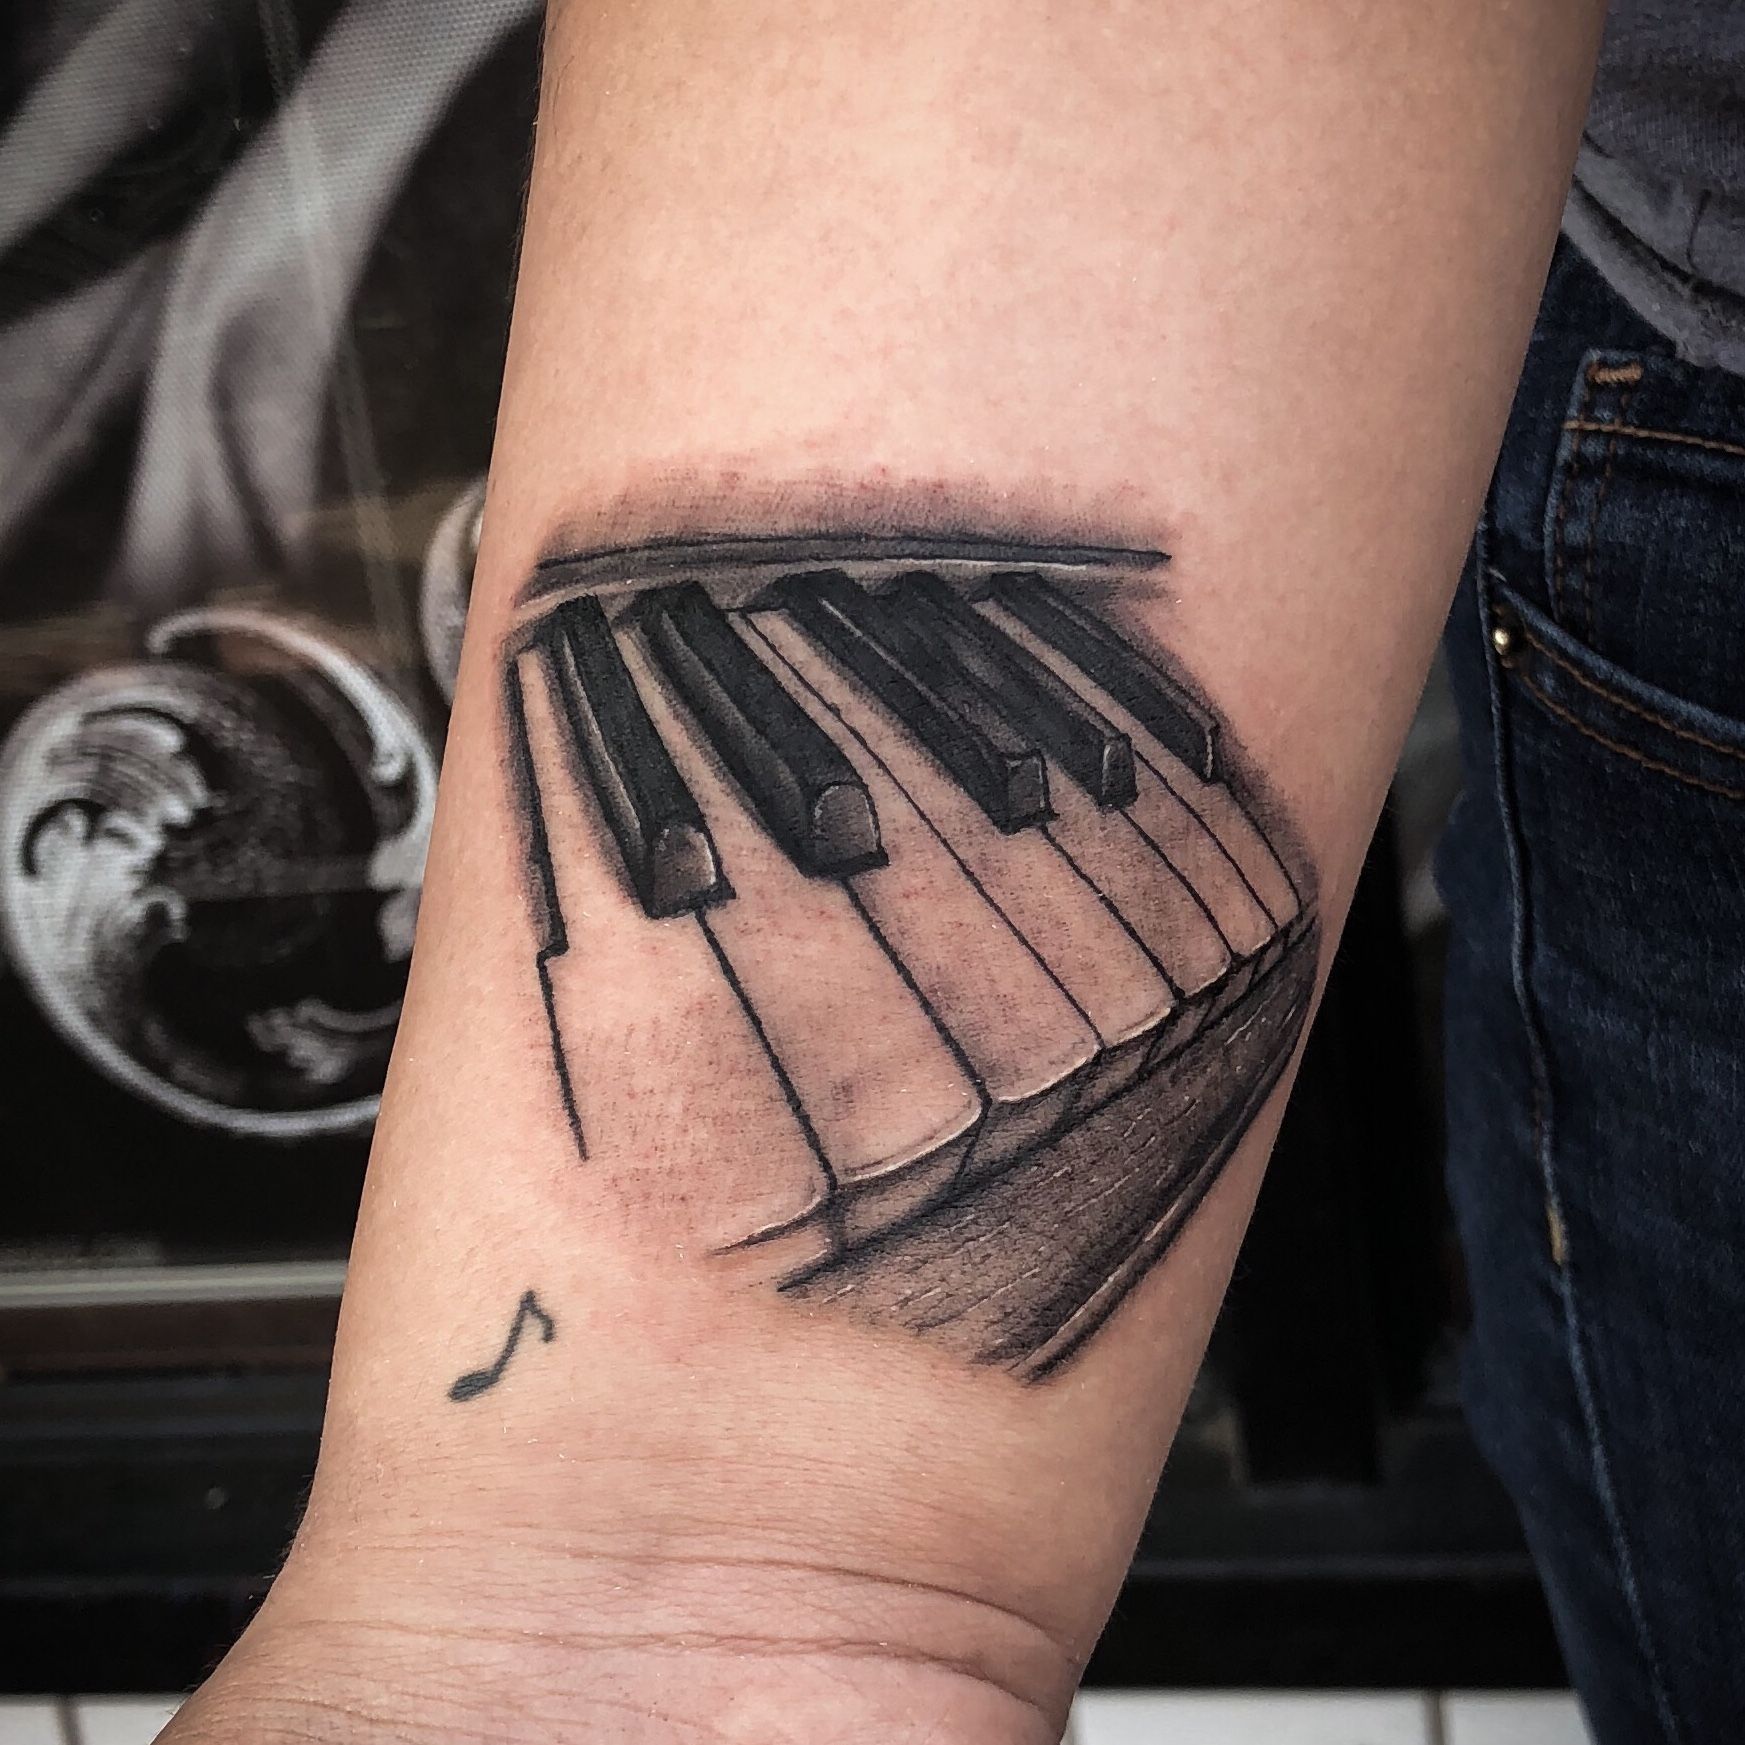 101 Best Piano Tattoo Ideas That Will Blow Your Mind!